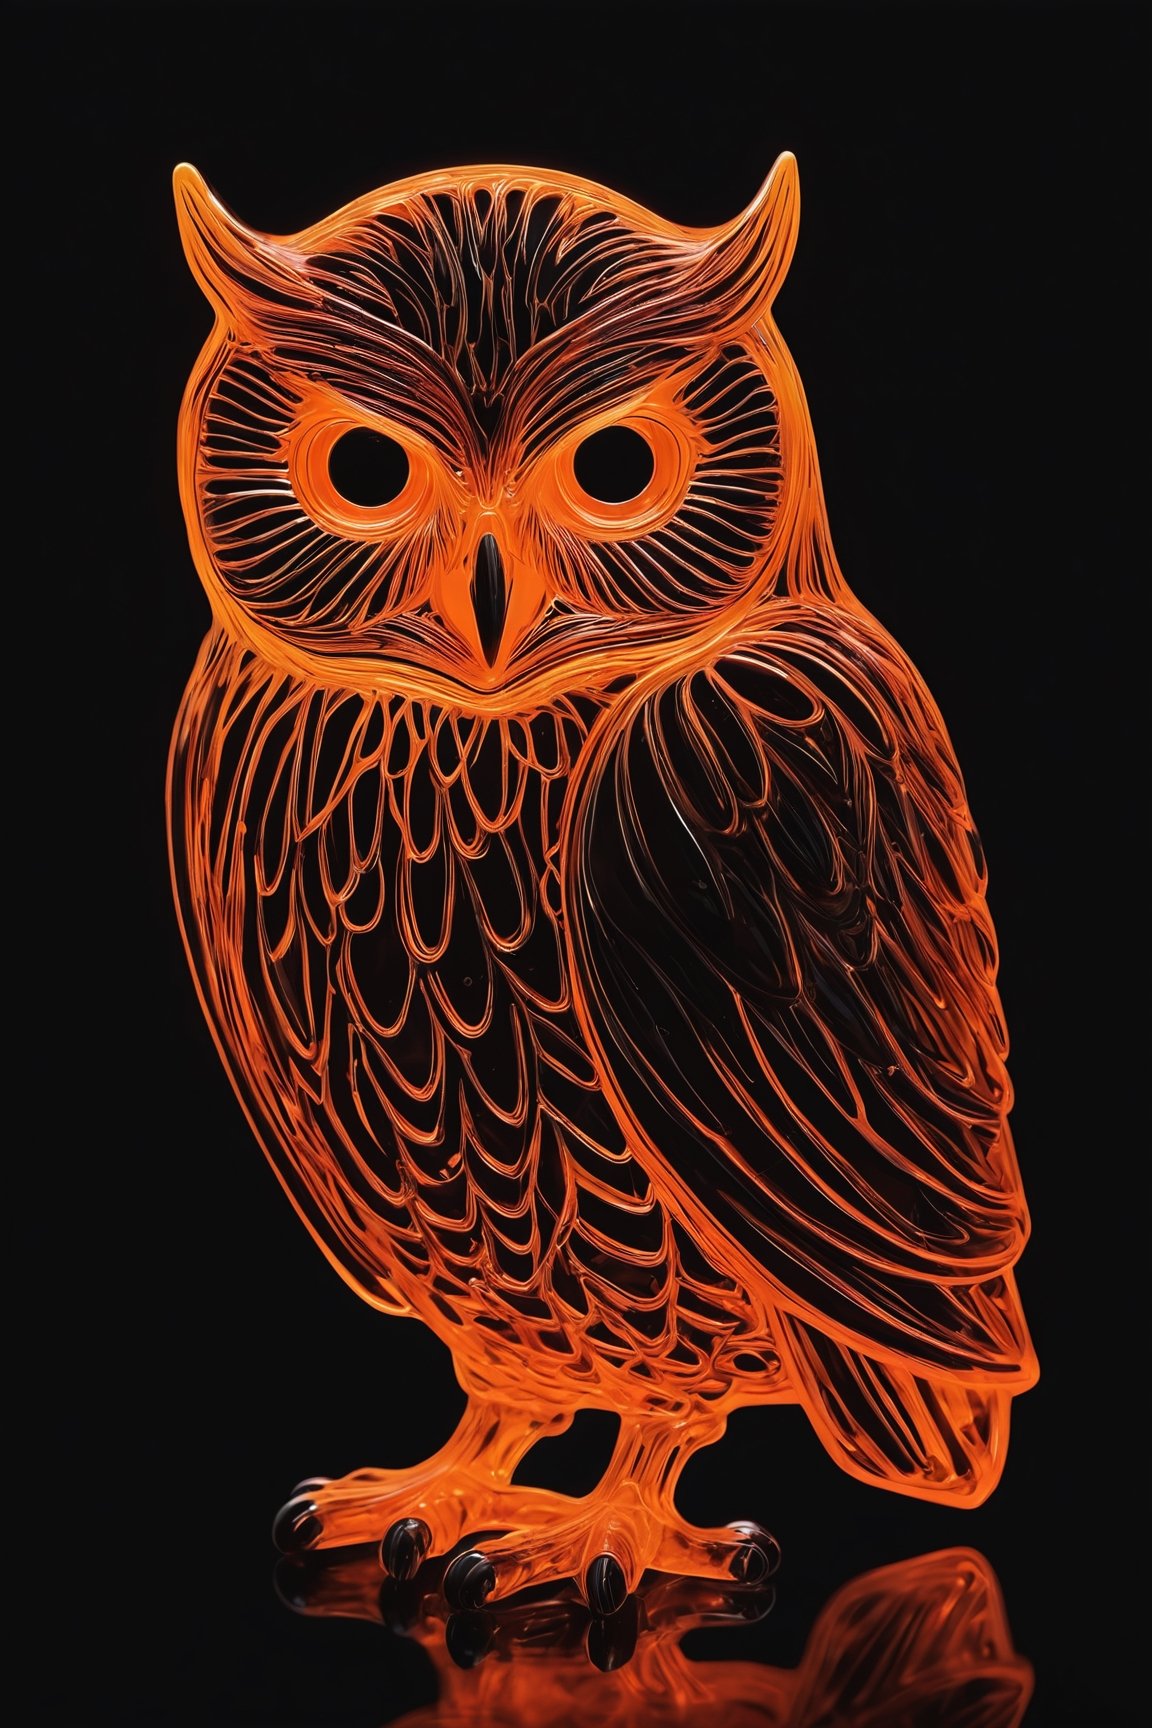 Molten glass art of a mysterious owl, glowing in neon orange, creating bold nocturnal silhouettes, pure black background